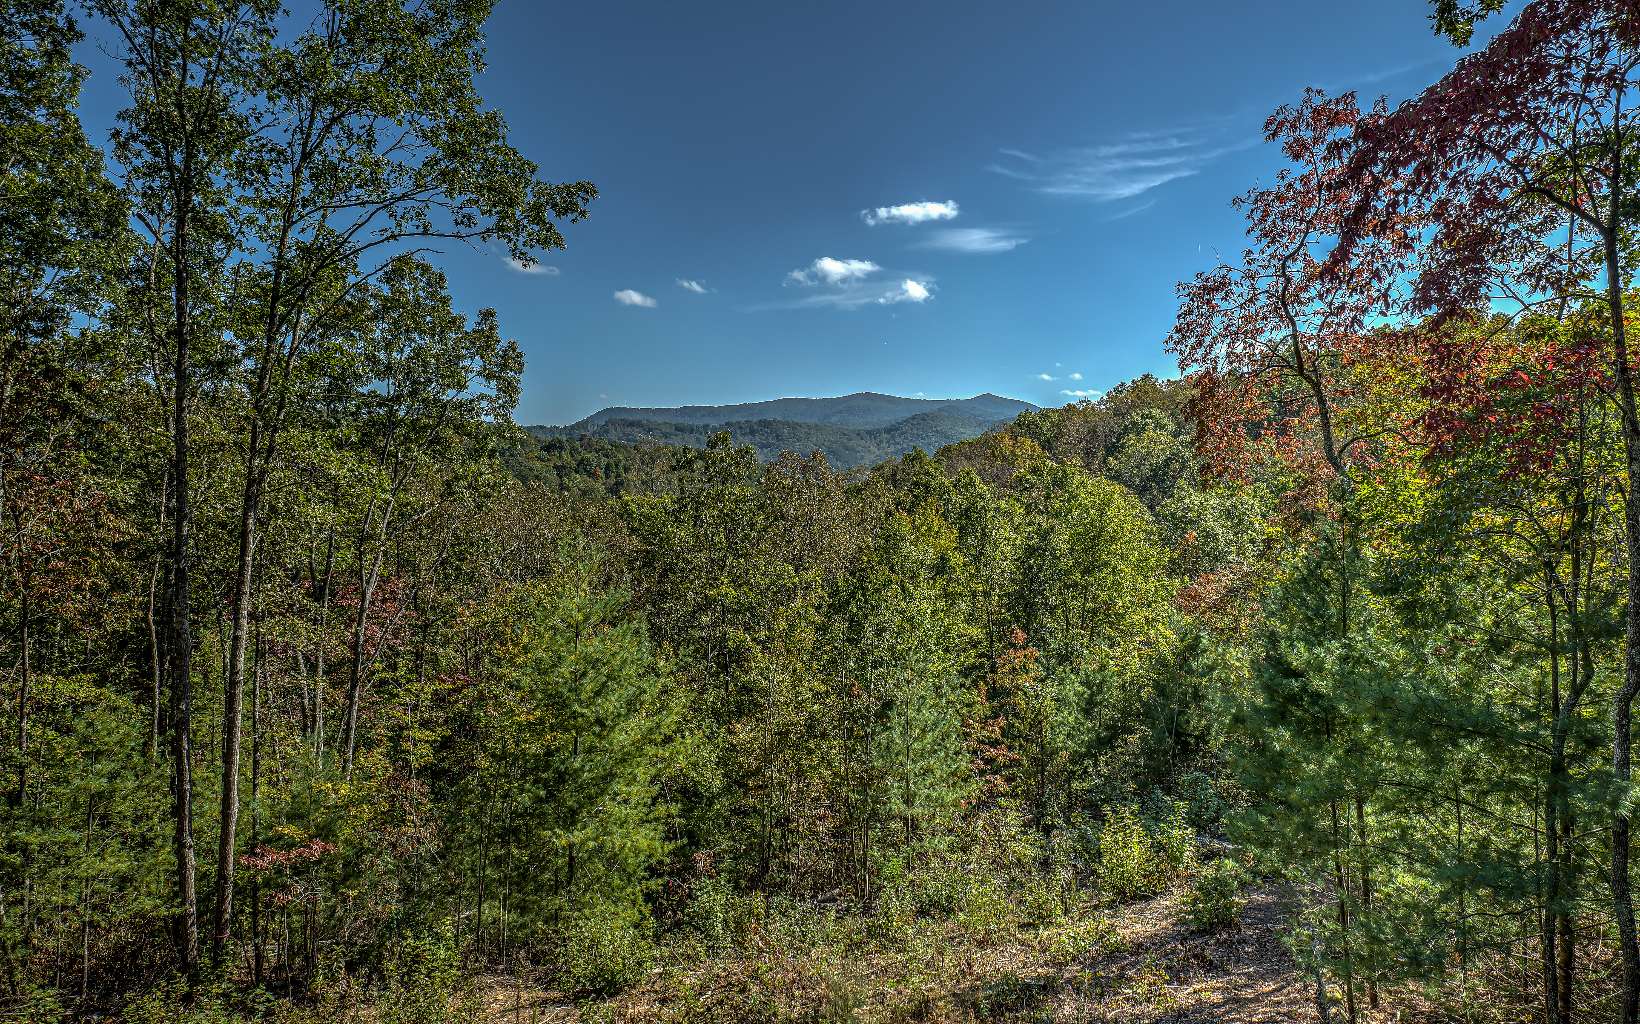 This lot features a private setting with modern conveniences. Only 5 miles to downtown Blue Ridge. Gravel drive way is already in place. Solid cell service. Paved access. Pad has been cleared. All that is needed is your dream home.